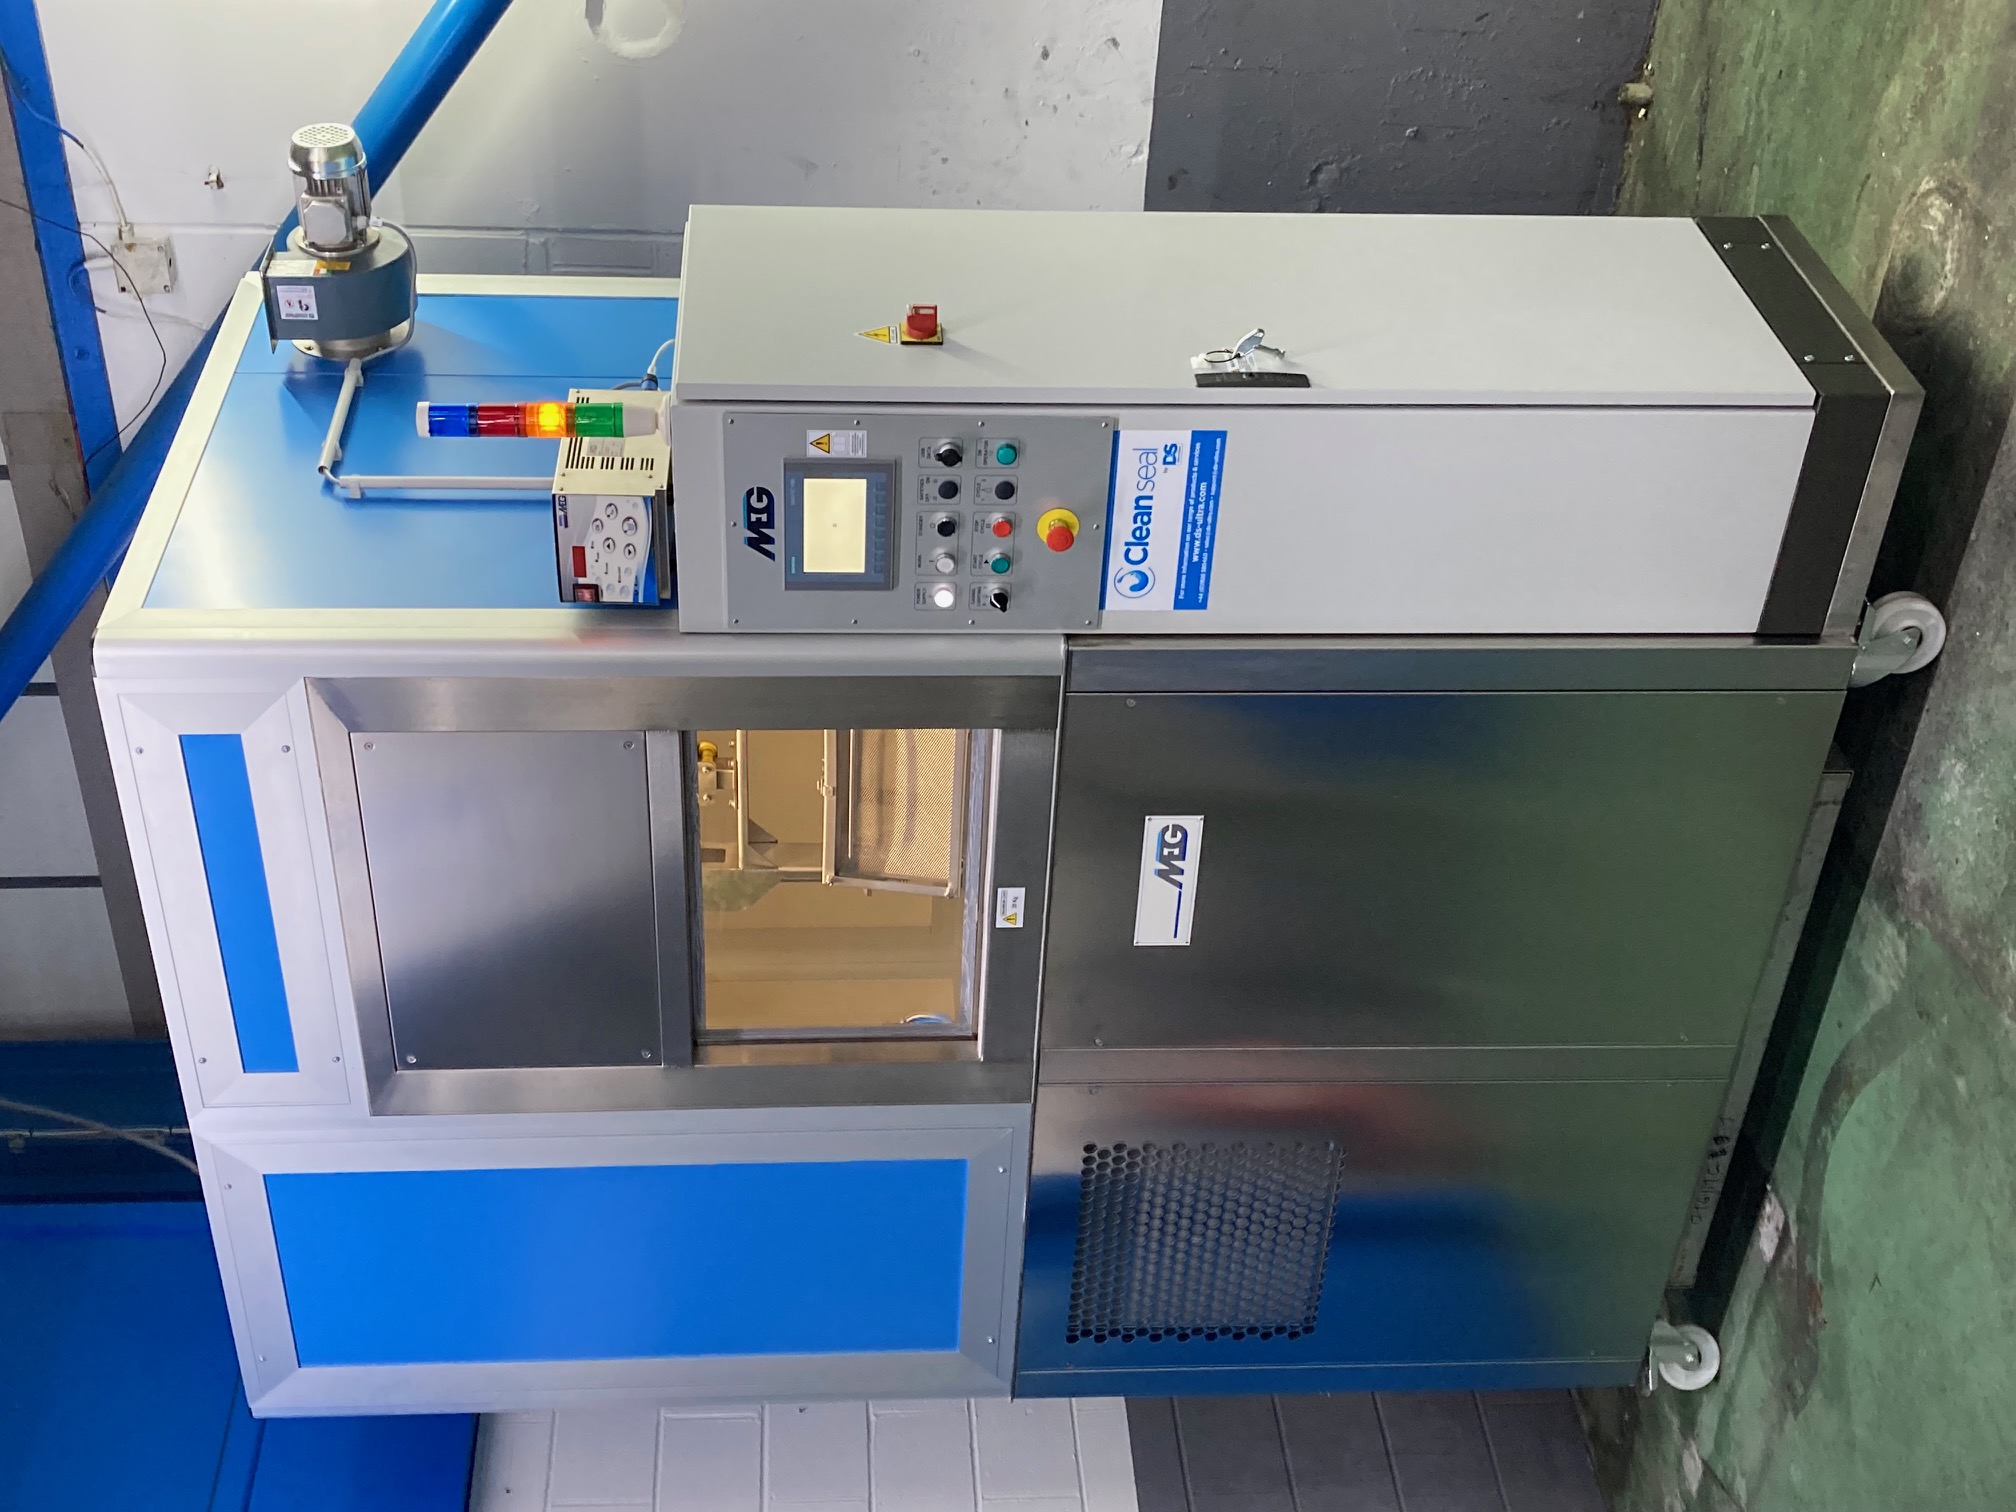 Cleanseal Ultrasonic Cleaning system with rotating basket